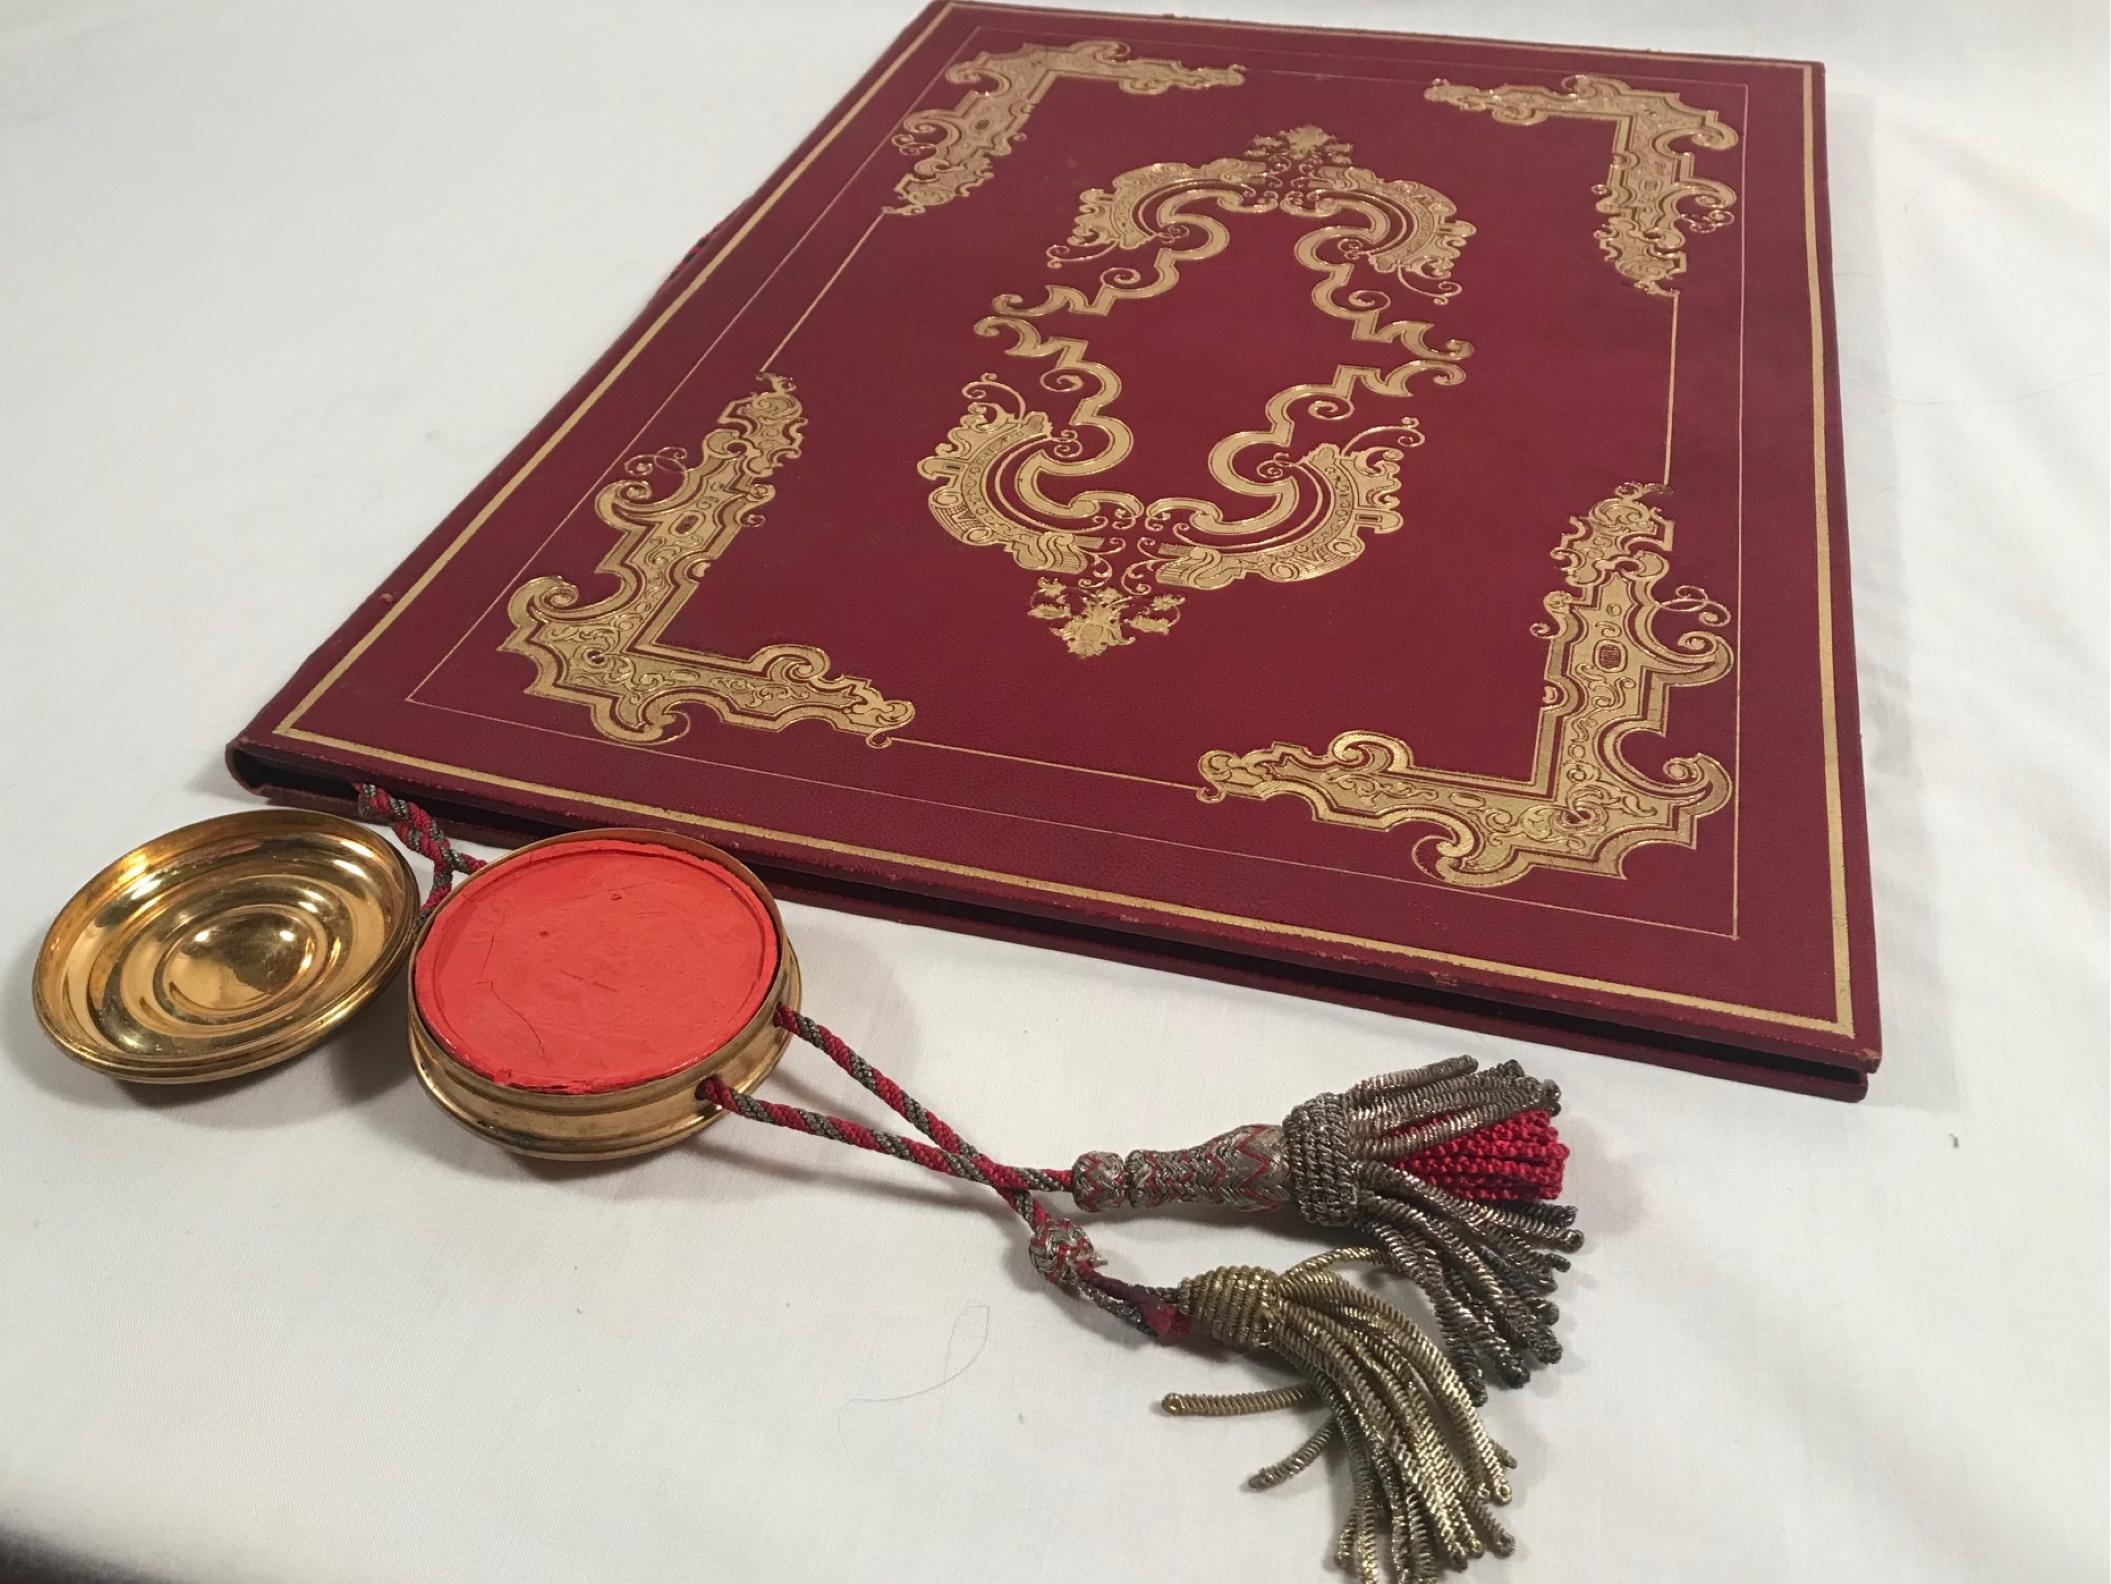 19th century German Baronship Document, Archduke Ludwig III of Hessen

Outstanding document bound with threaded rope in crimson red leather with burnished 24-carat gold embossed. A wax seal of the Arch Dukedom enclosed in a brass box with gold